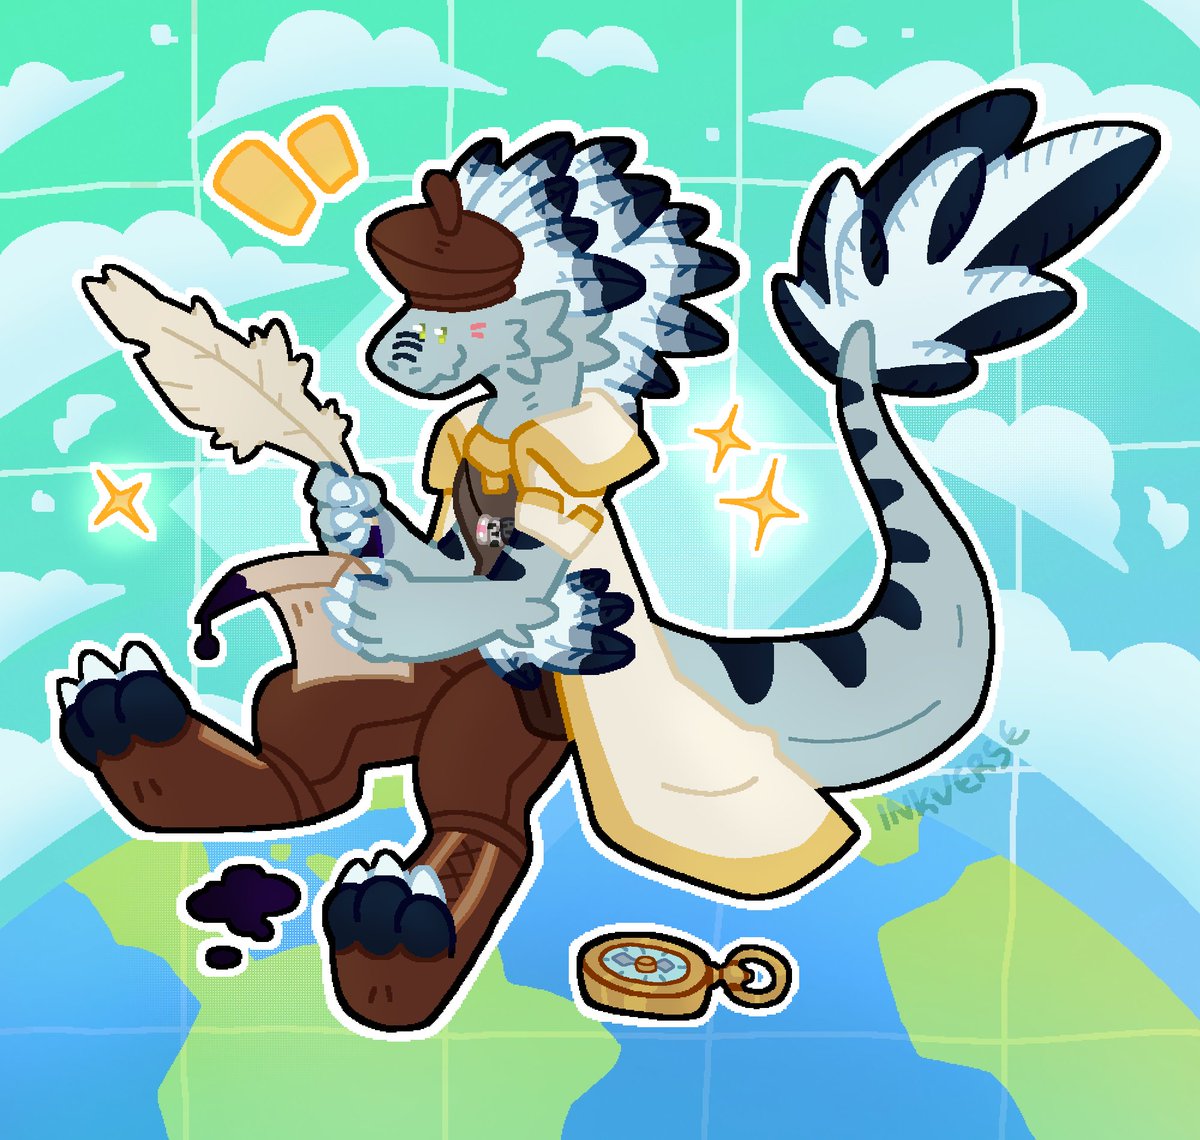 A cartographer utahraptor mapping out the geography surrounding him with his unique touch ✨🗺️

[C☀️mmission work!]